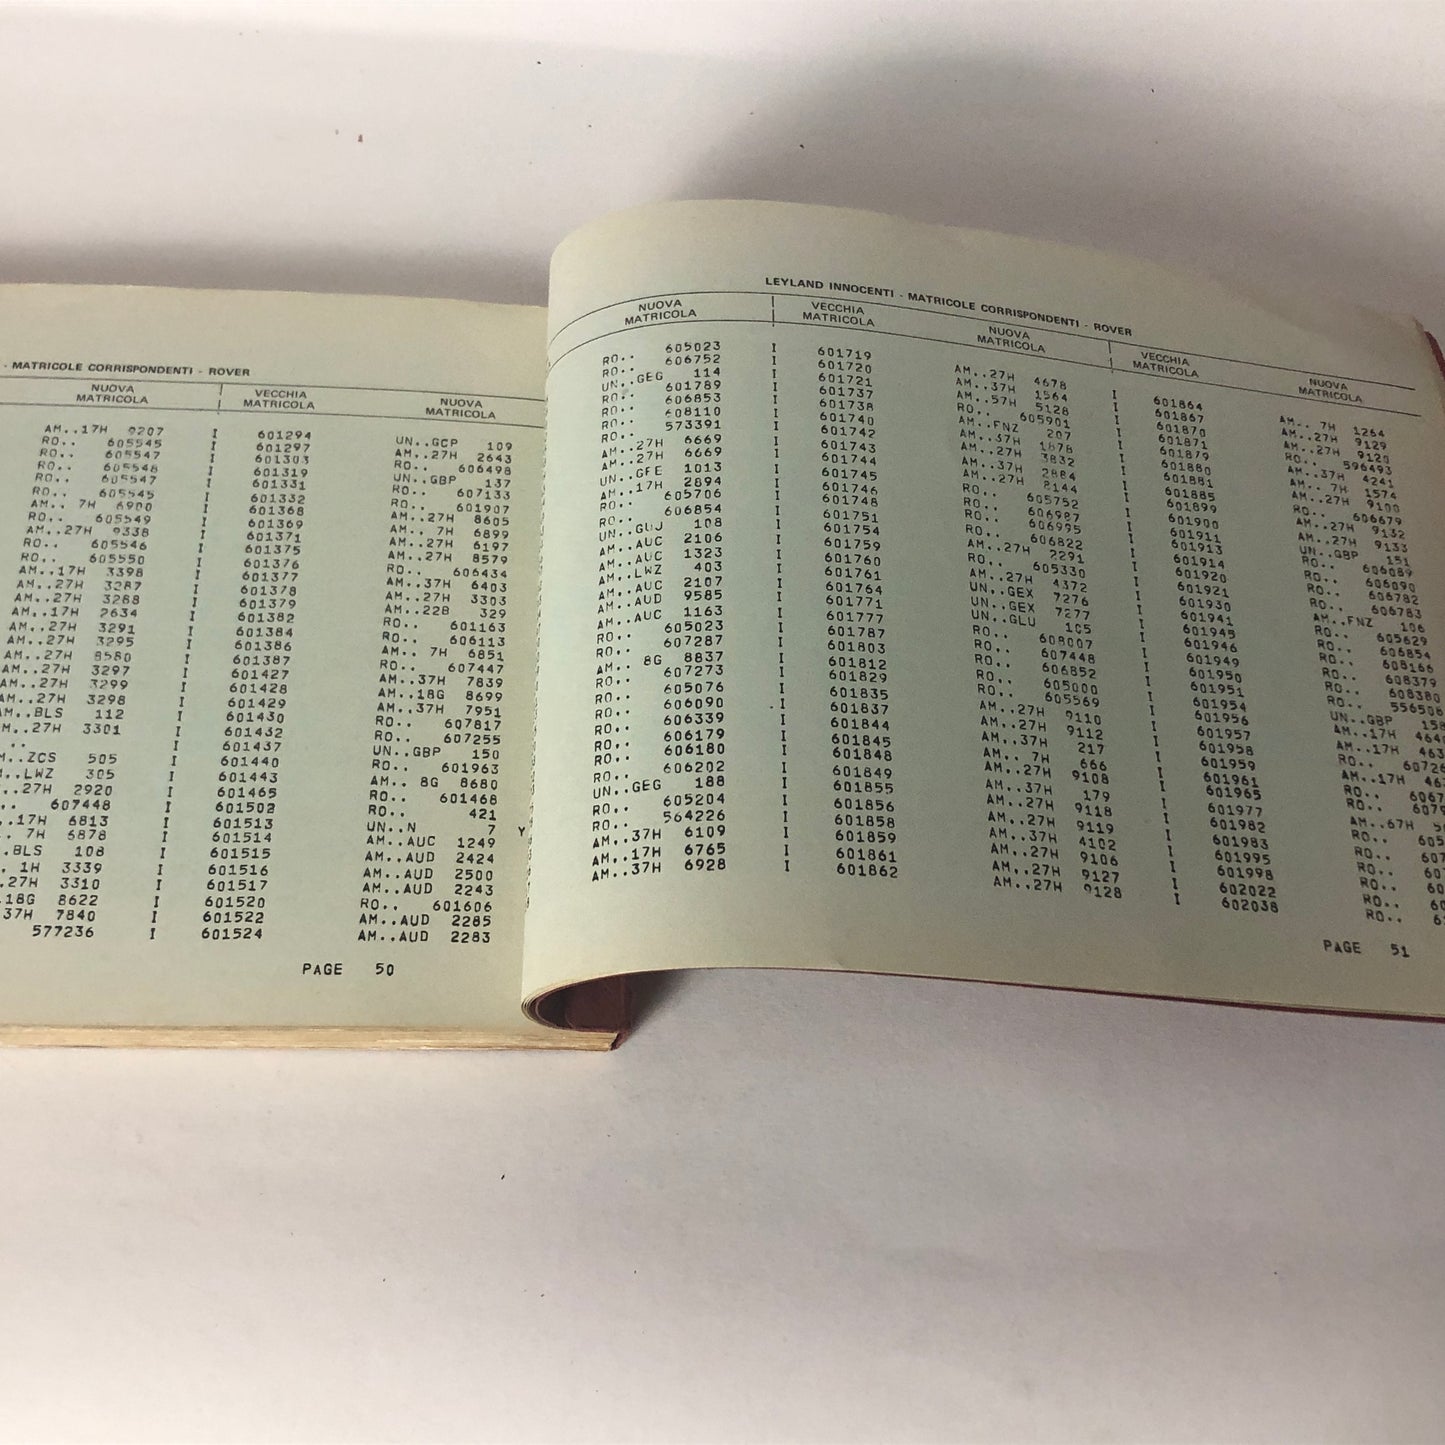 Leyland Innocenti SpA, Price List of Spare Parts Rover n.211 Year 1973